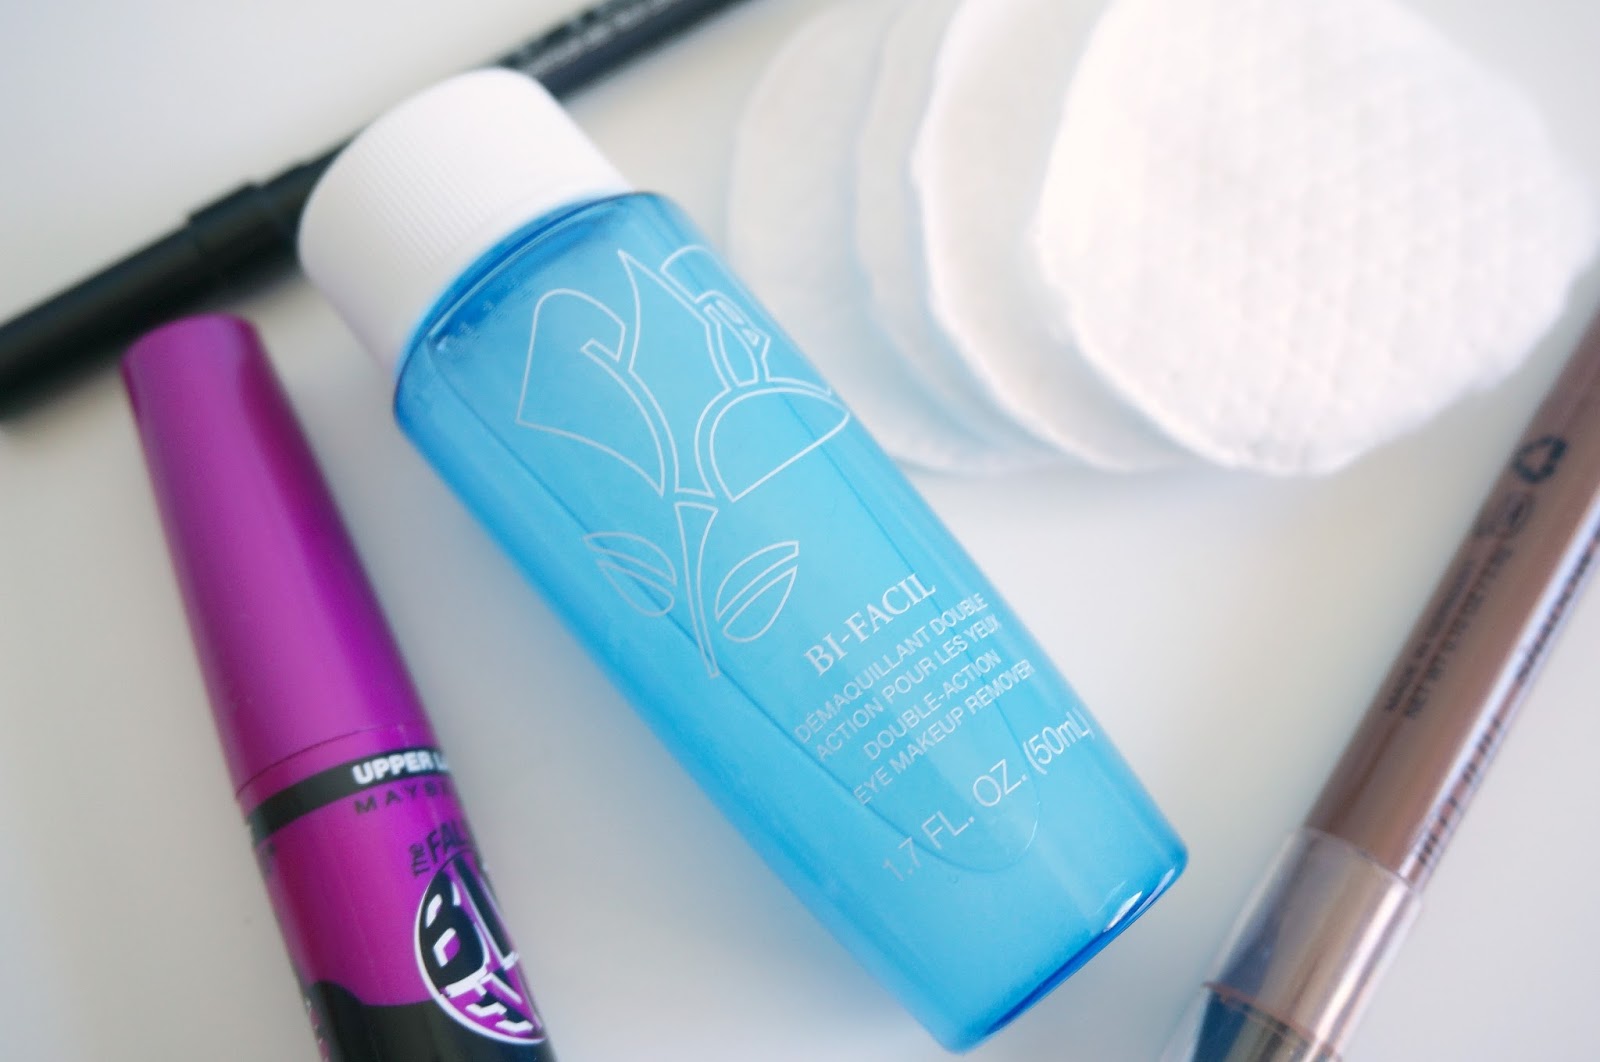 The Science of Chic: Lancôme Bi-Facil Double-Action Eye Makeup Remover